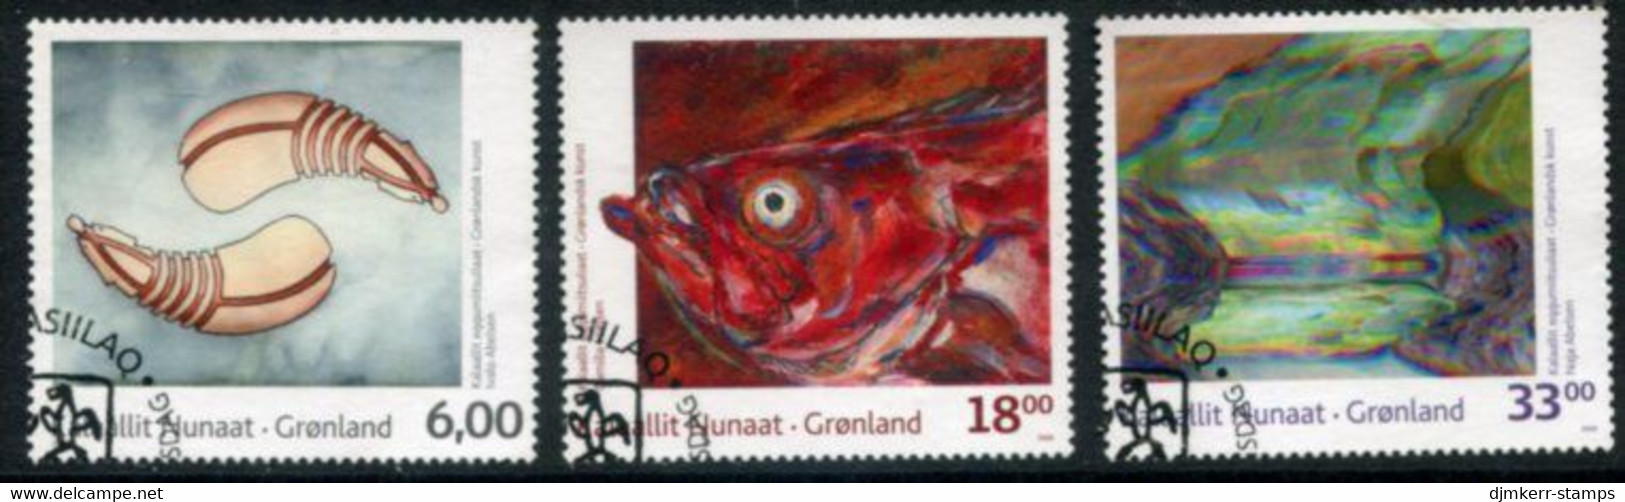 GREENLAND 2009 Contemporary Art III Used.   Michel 537-39 - Used Stamps